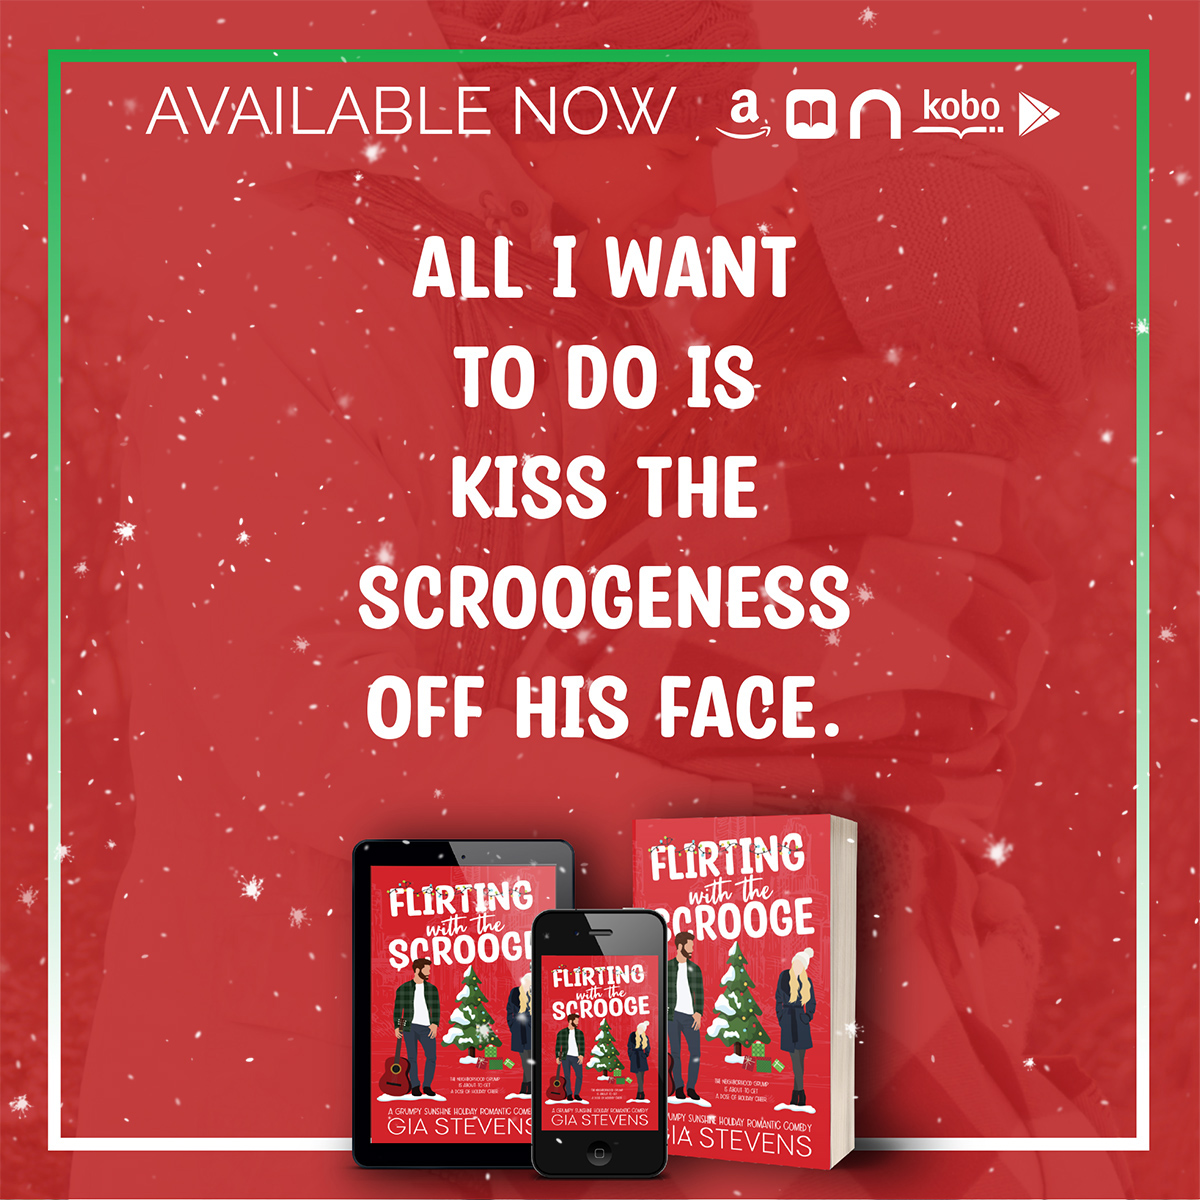 Flirting with the Scrooge (Harbor Highlands Series) by Gia Stevens is LIVE!
𝗦𝘁𝗮𝗿𝘁 𝗿𝗲𝗮𝗱𝗶𝗻𝗴 𝘁𝗼𝗱𝗮𝘆!
Amazon➜ geni.us/FTWScrooge_AMZ

#FlirtingWithTheScroogeRelease #NewRelease  #GiaStevensAuthor #HarborHighlandsSeries #MustRead #HolidayRomance #steamyRomcom